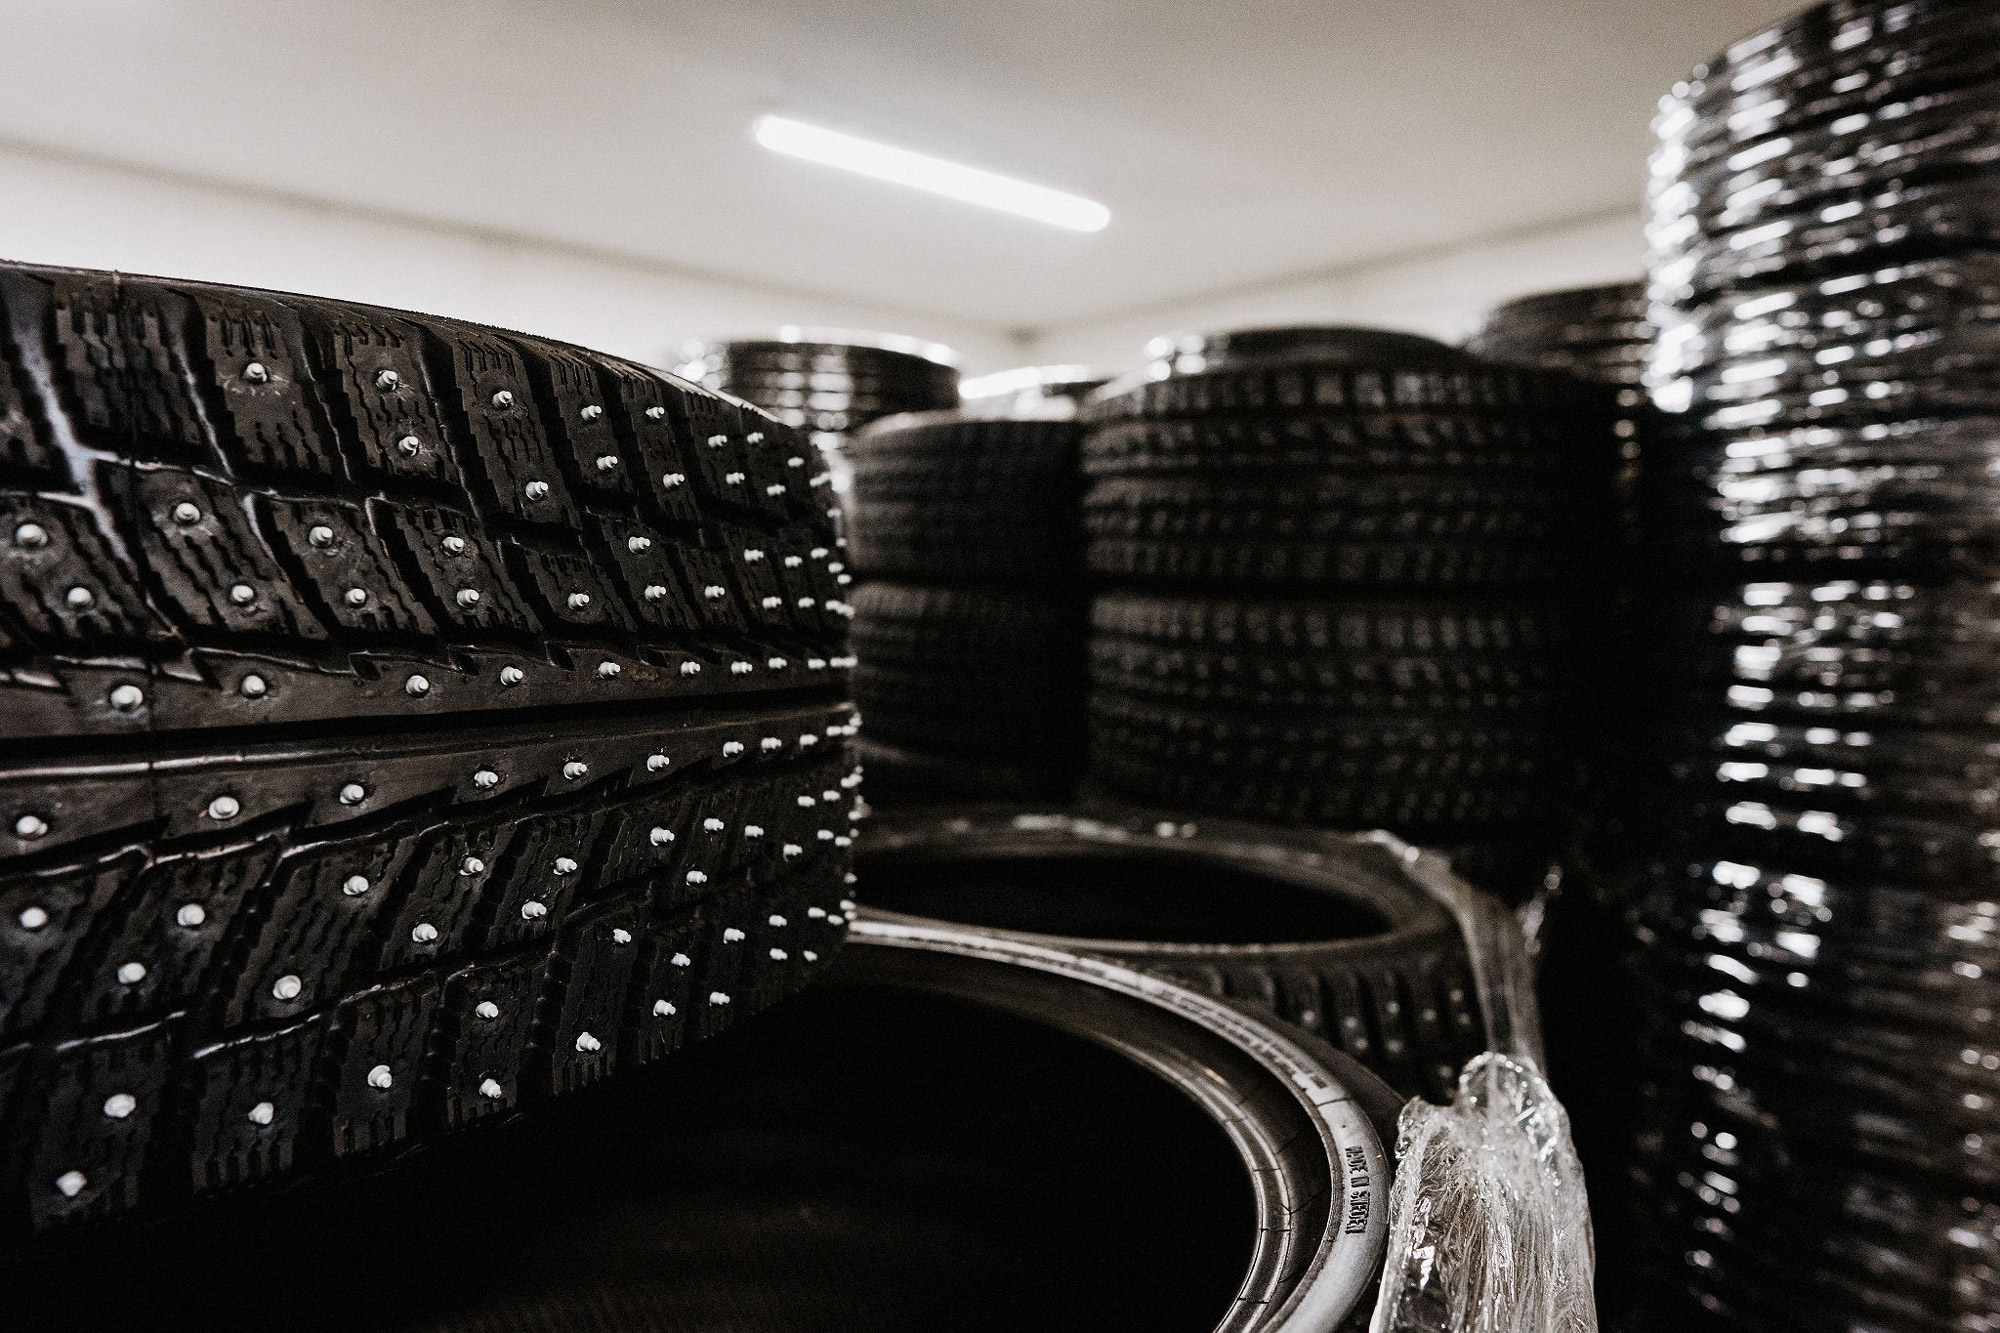 Studded car tyres stacked vertically in a lit room